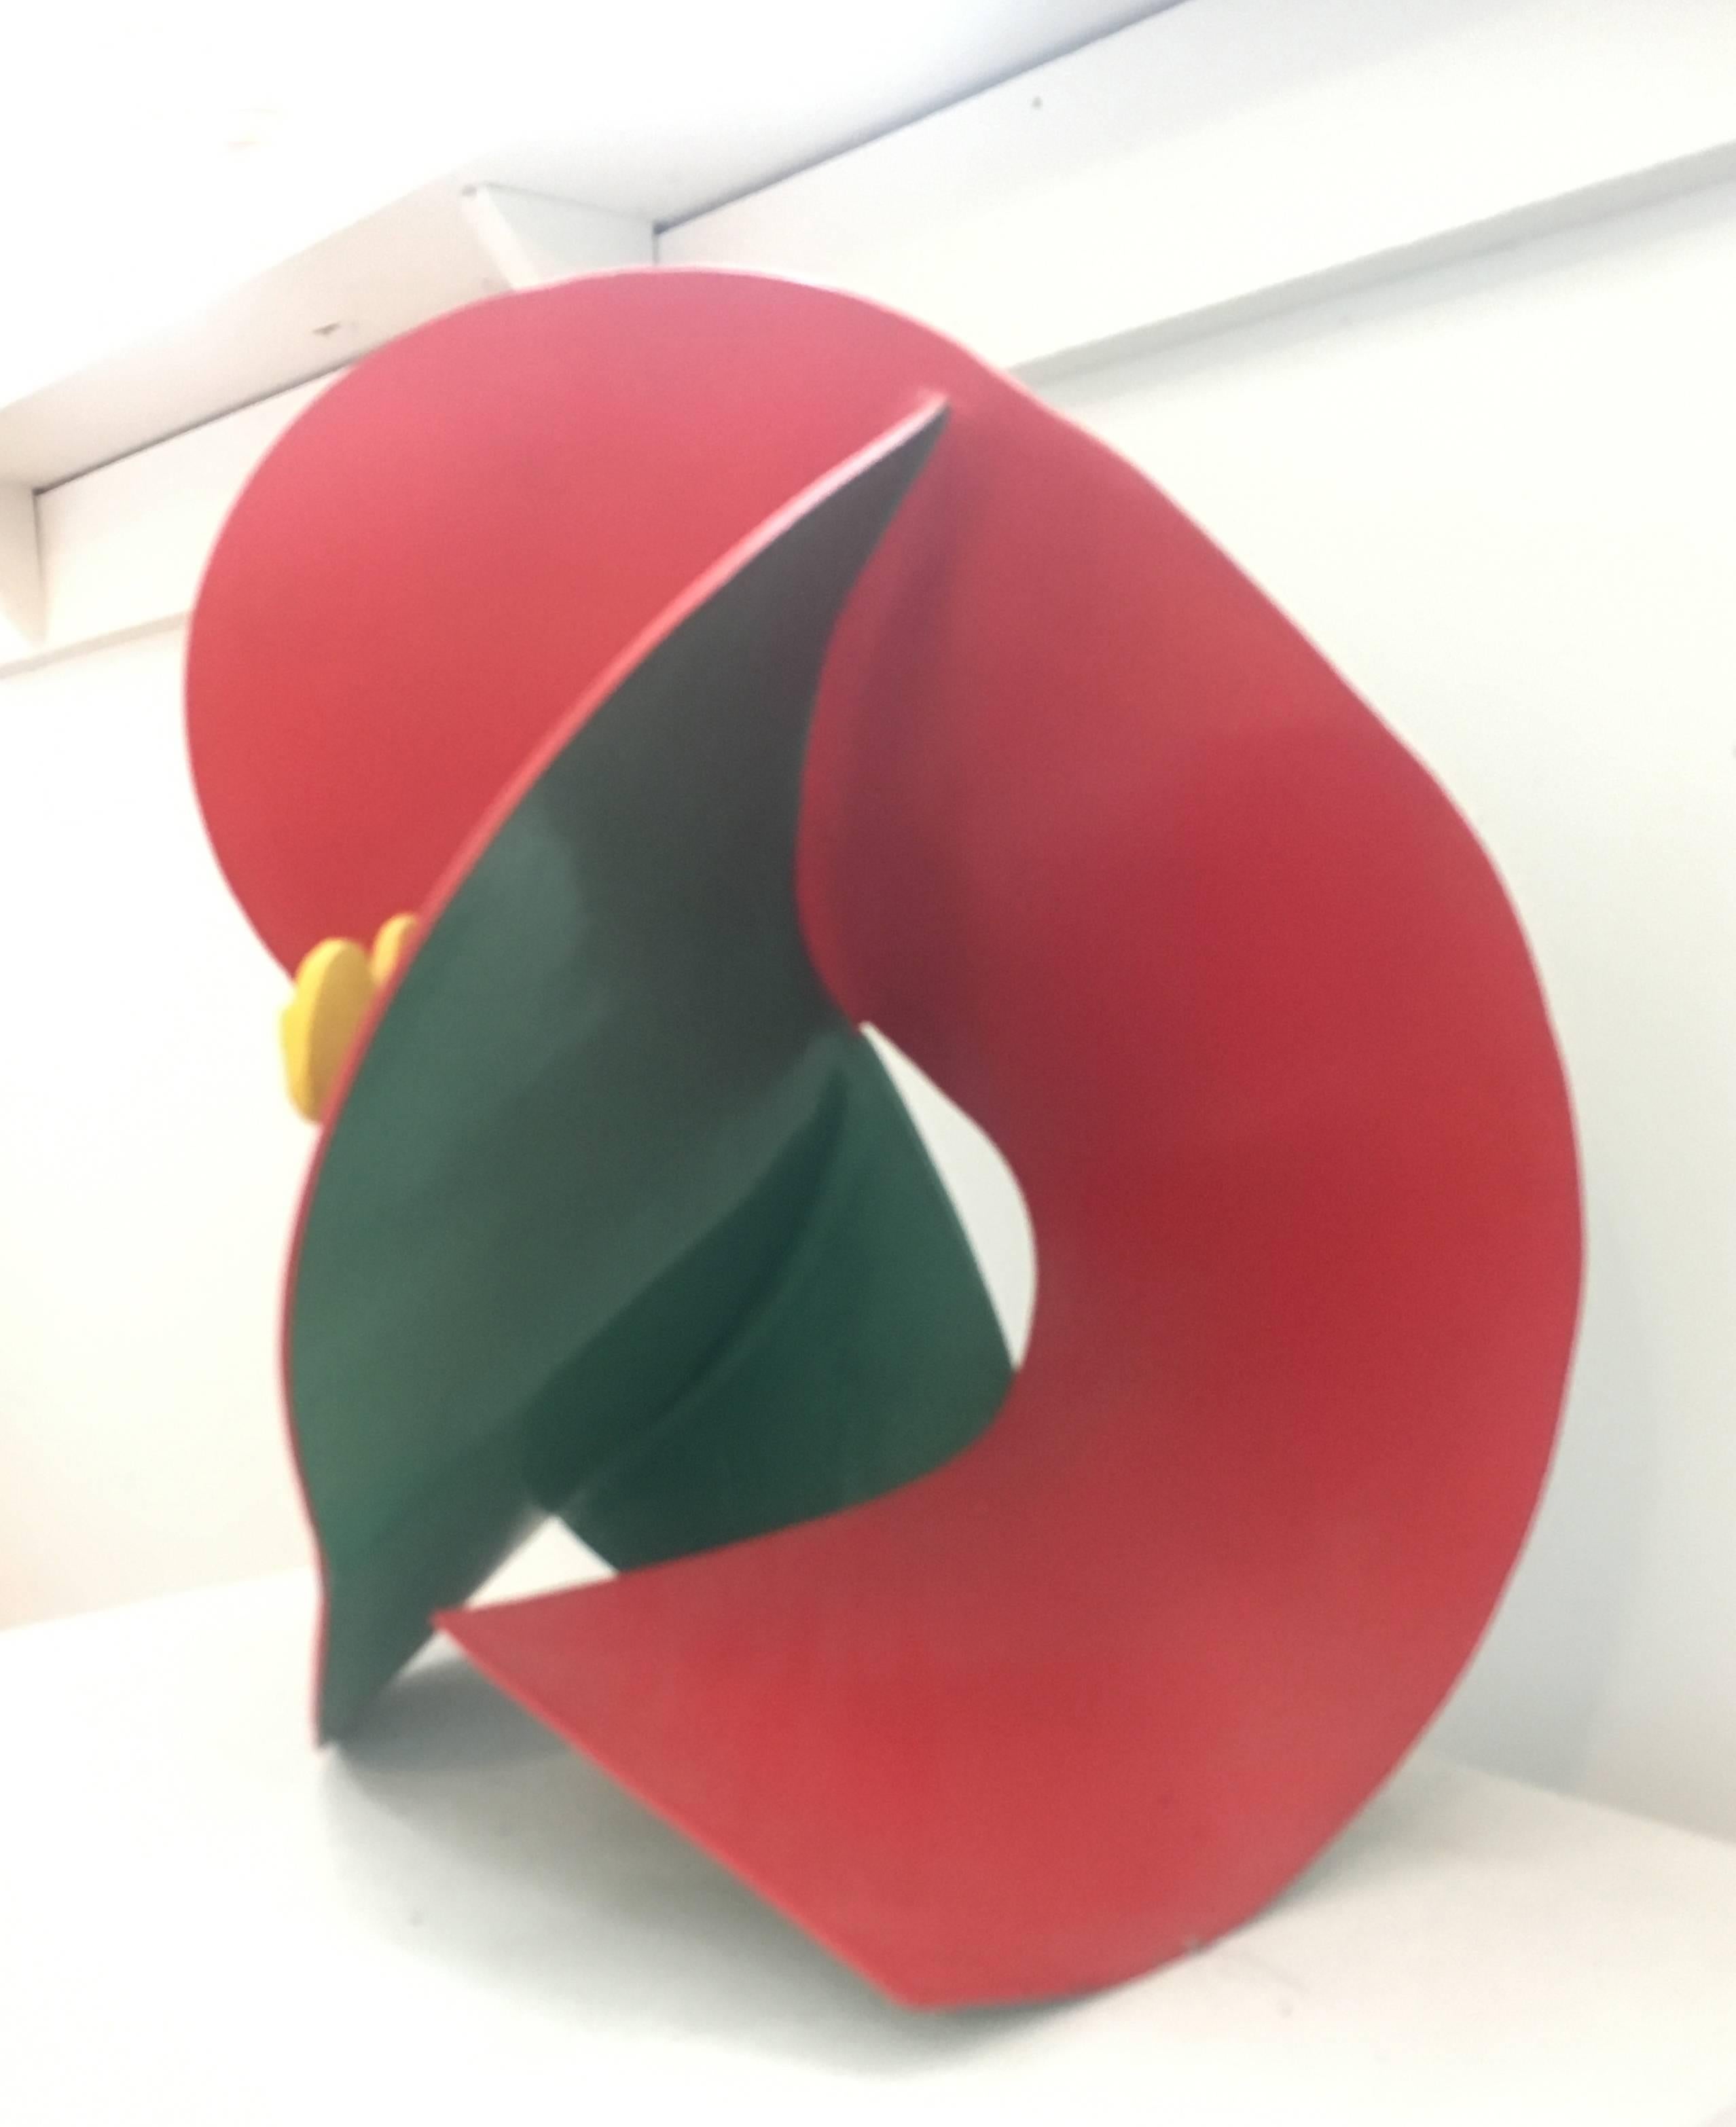 Small abstracted flower sculpture in mid century modern style
red, yellow, and green painted aluminum
14 x 14 x 14 inches

This small, contemporary abstract sculpture made of bright red painted aluminum is perfectly suited for a tabletop, pedestal,